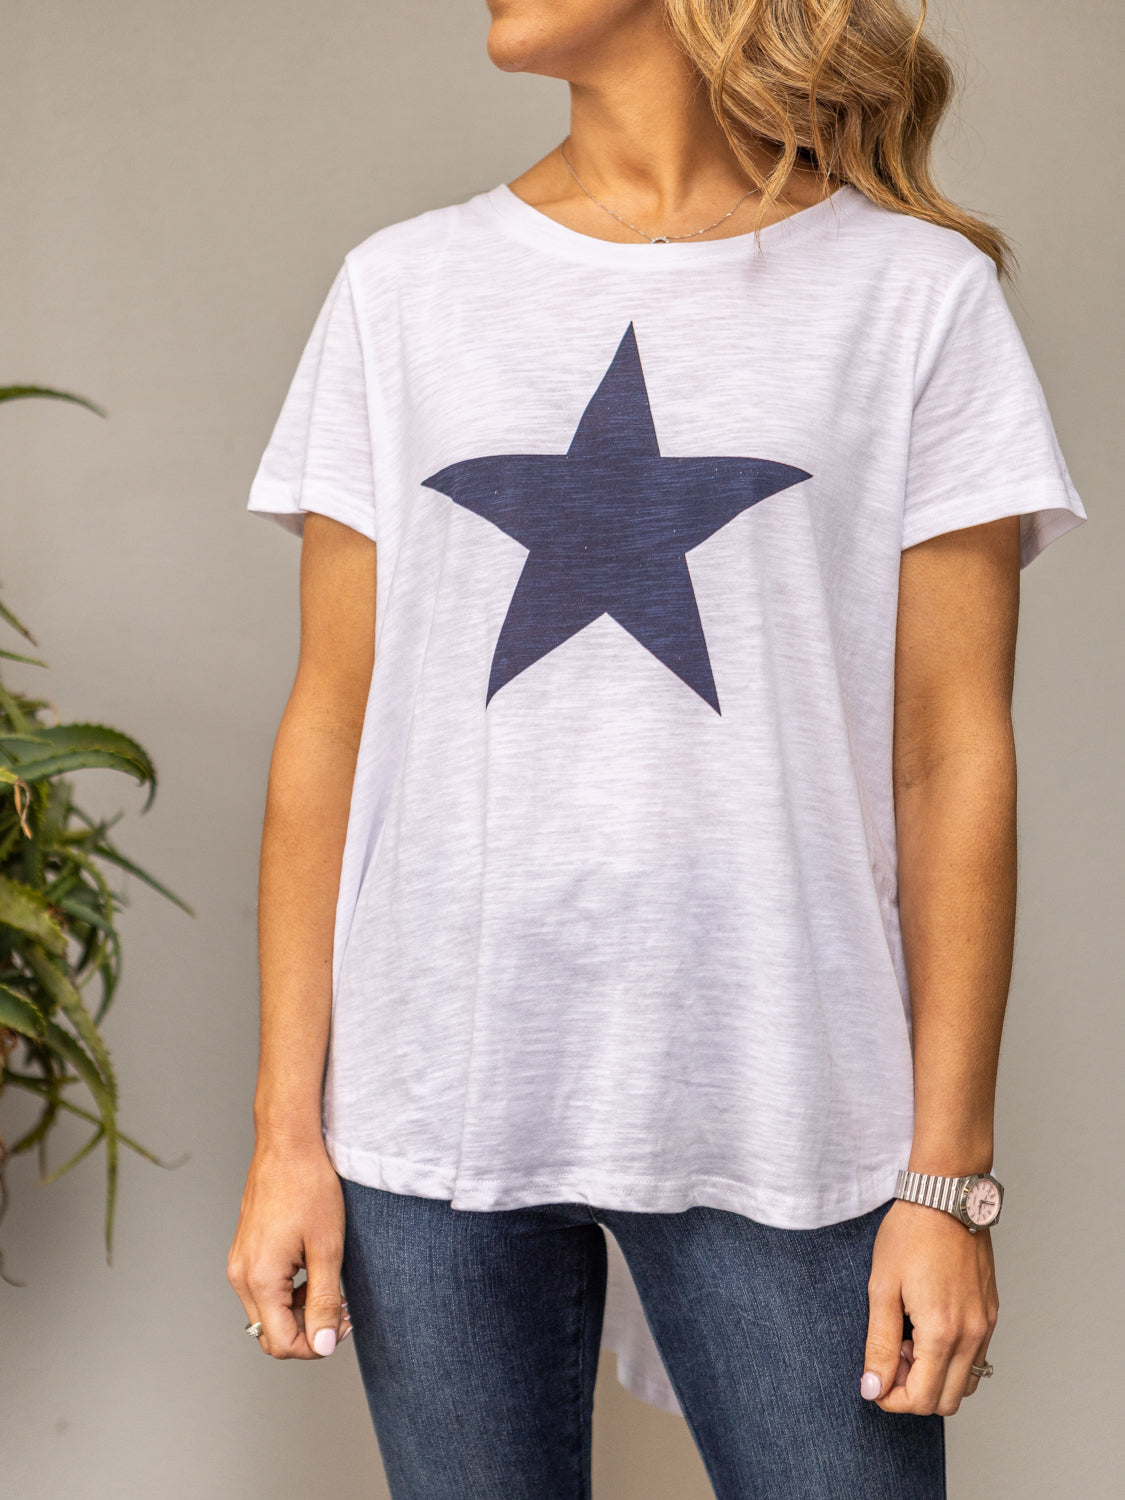 Maggie Tee - White With Navy Star